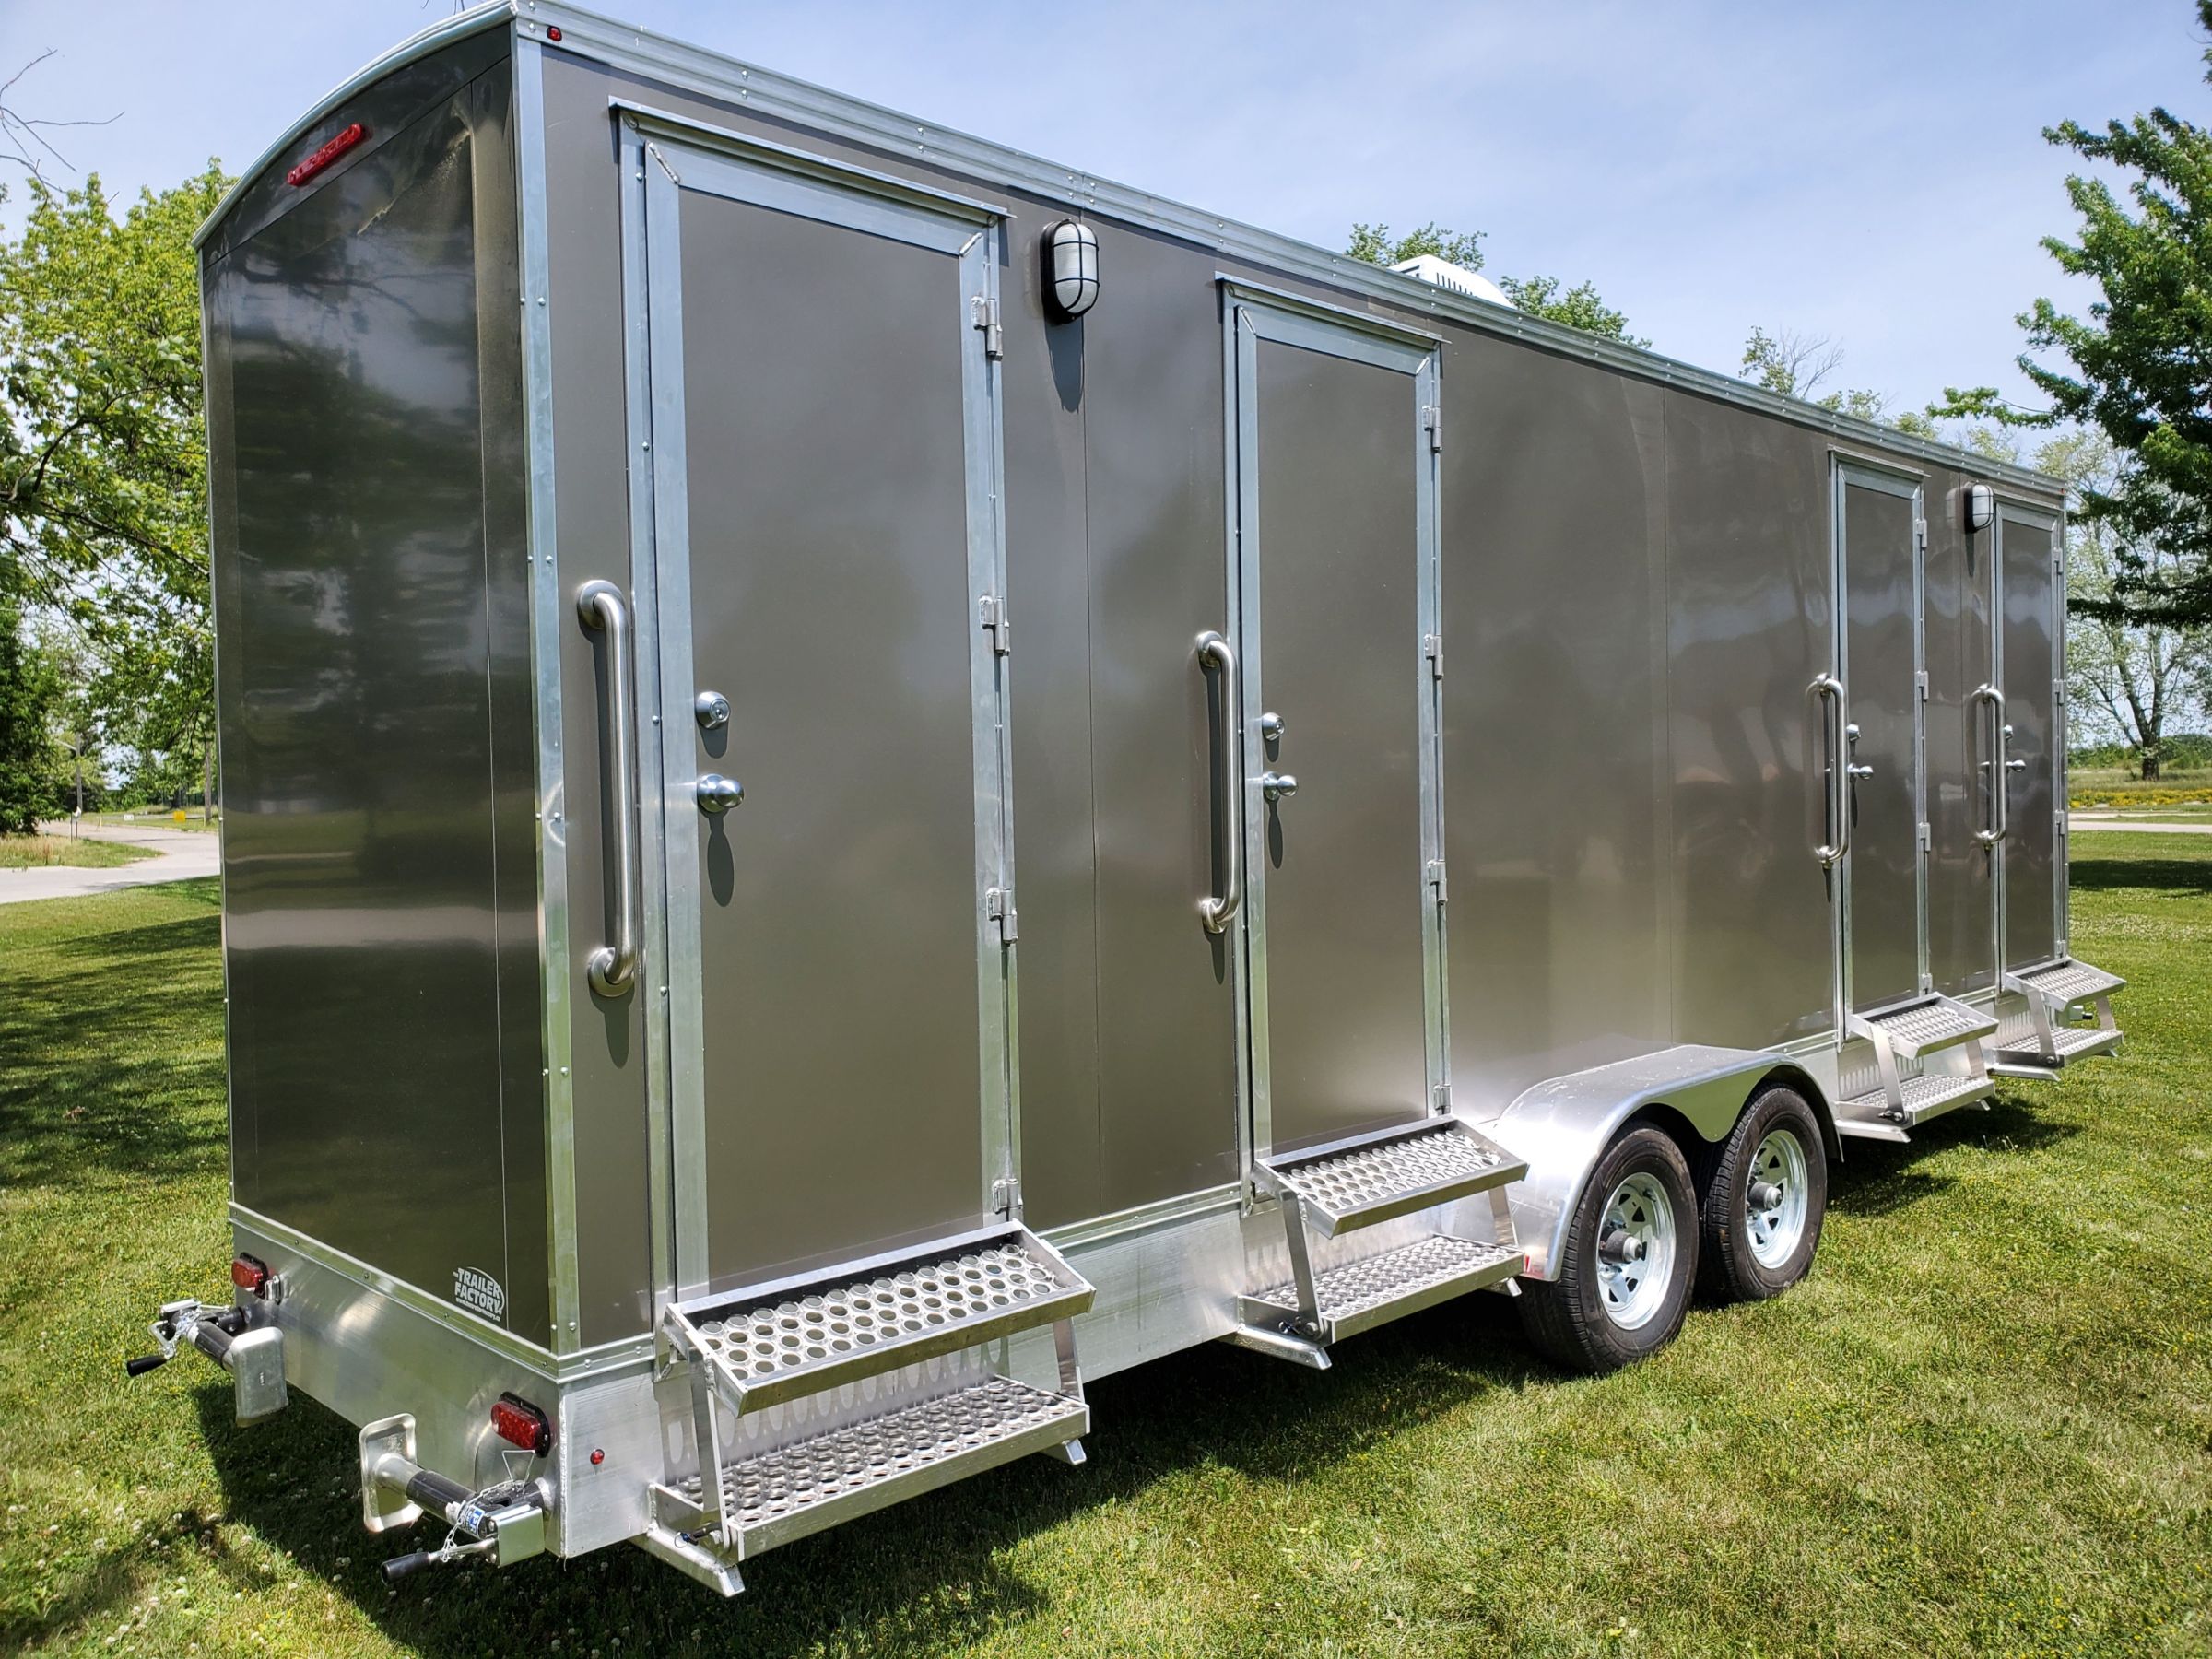 How to Find the Right Size Washroom Trailer for Your Needs